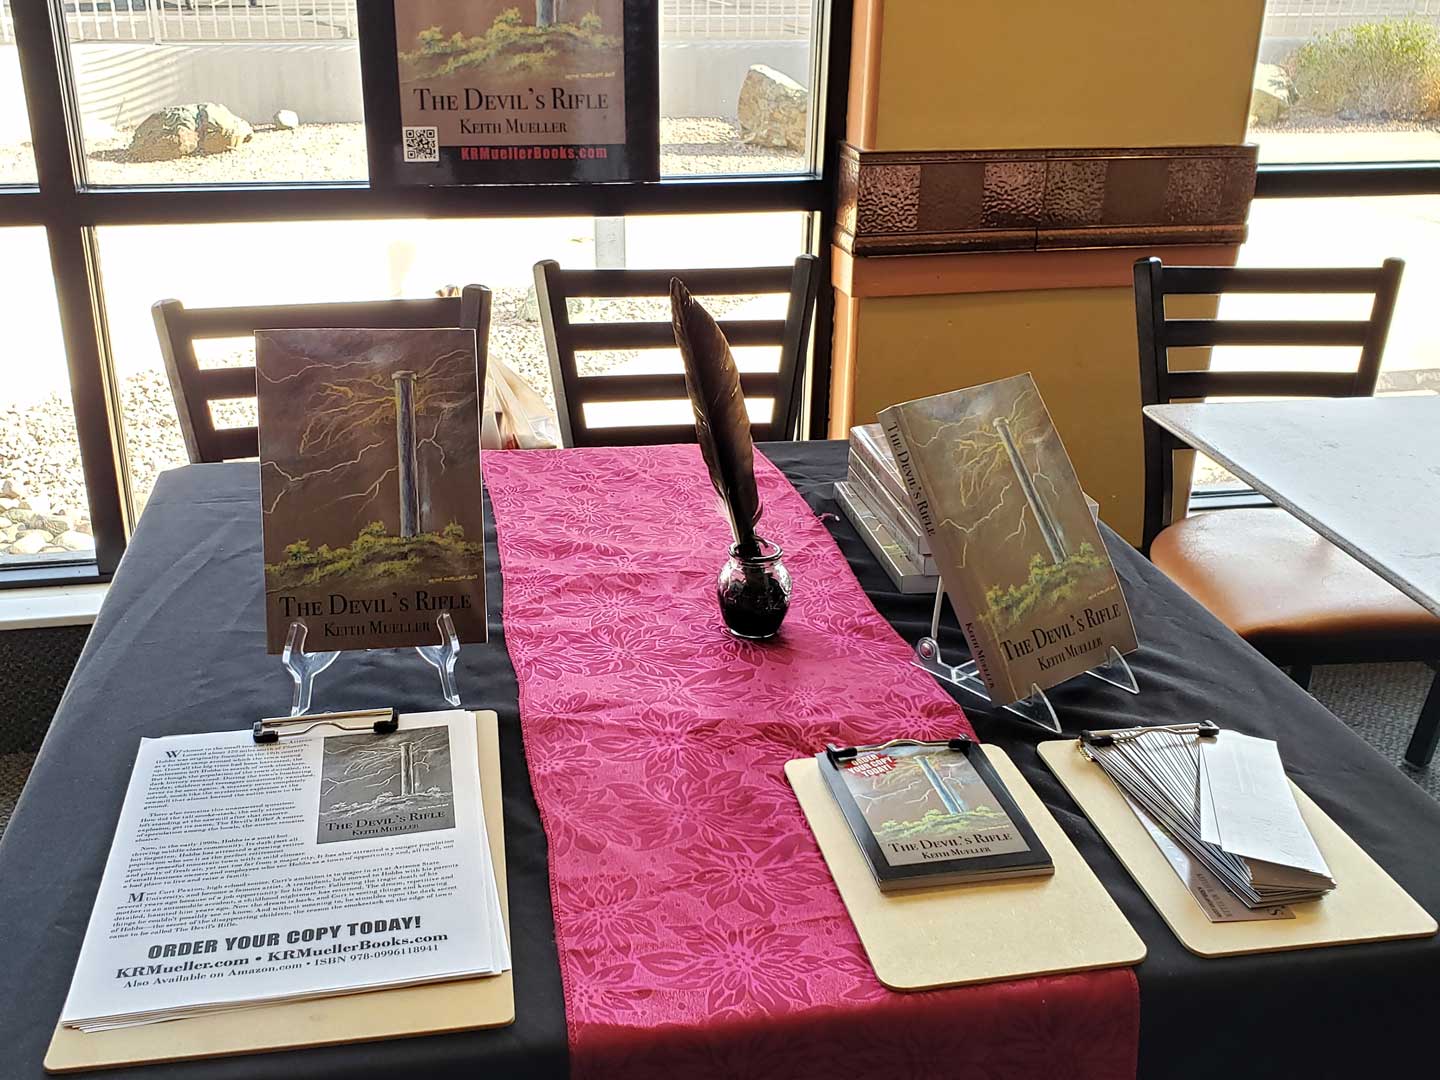 Keith R Mueller's table at a local book signing event